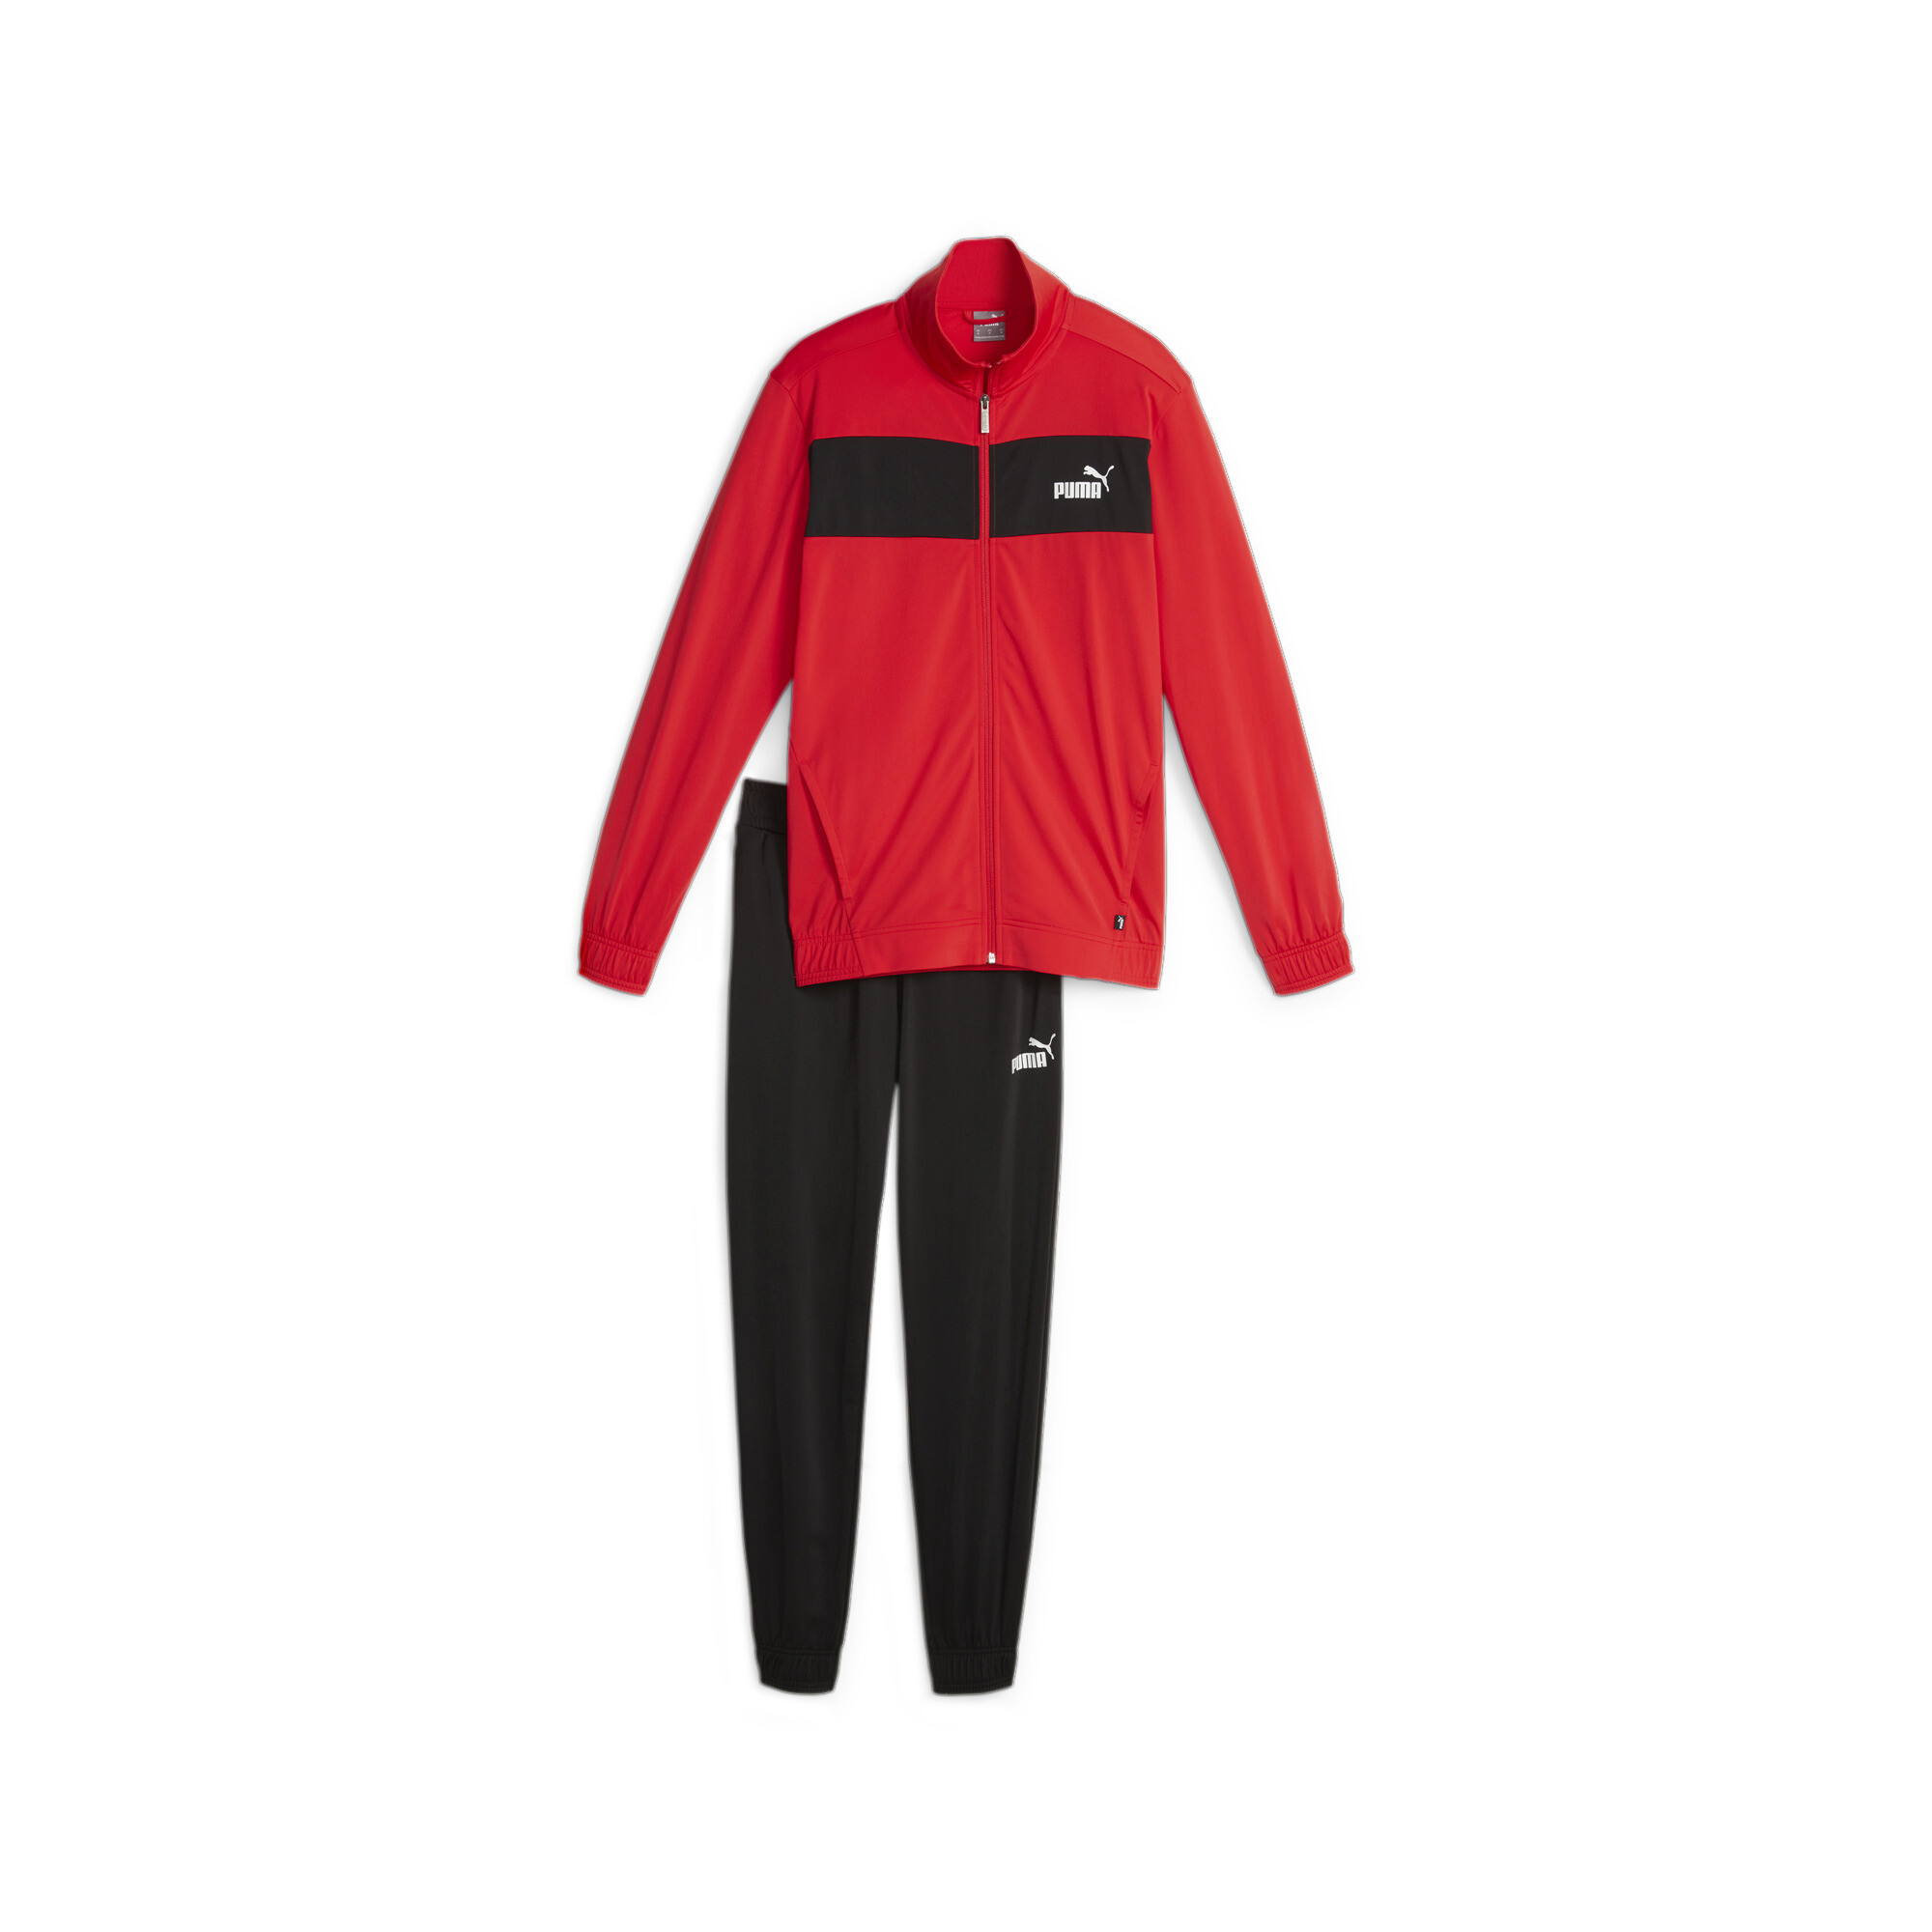 Men's Puma Men's Poly Tracksuit, Red, Size 3XL, Clothing